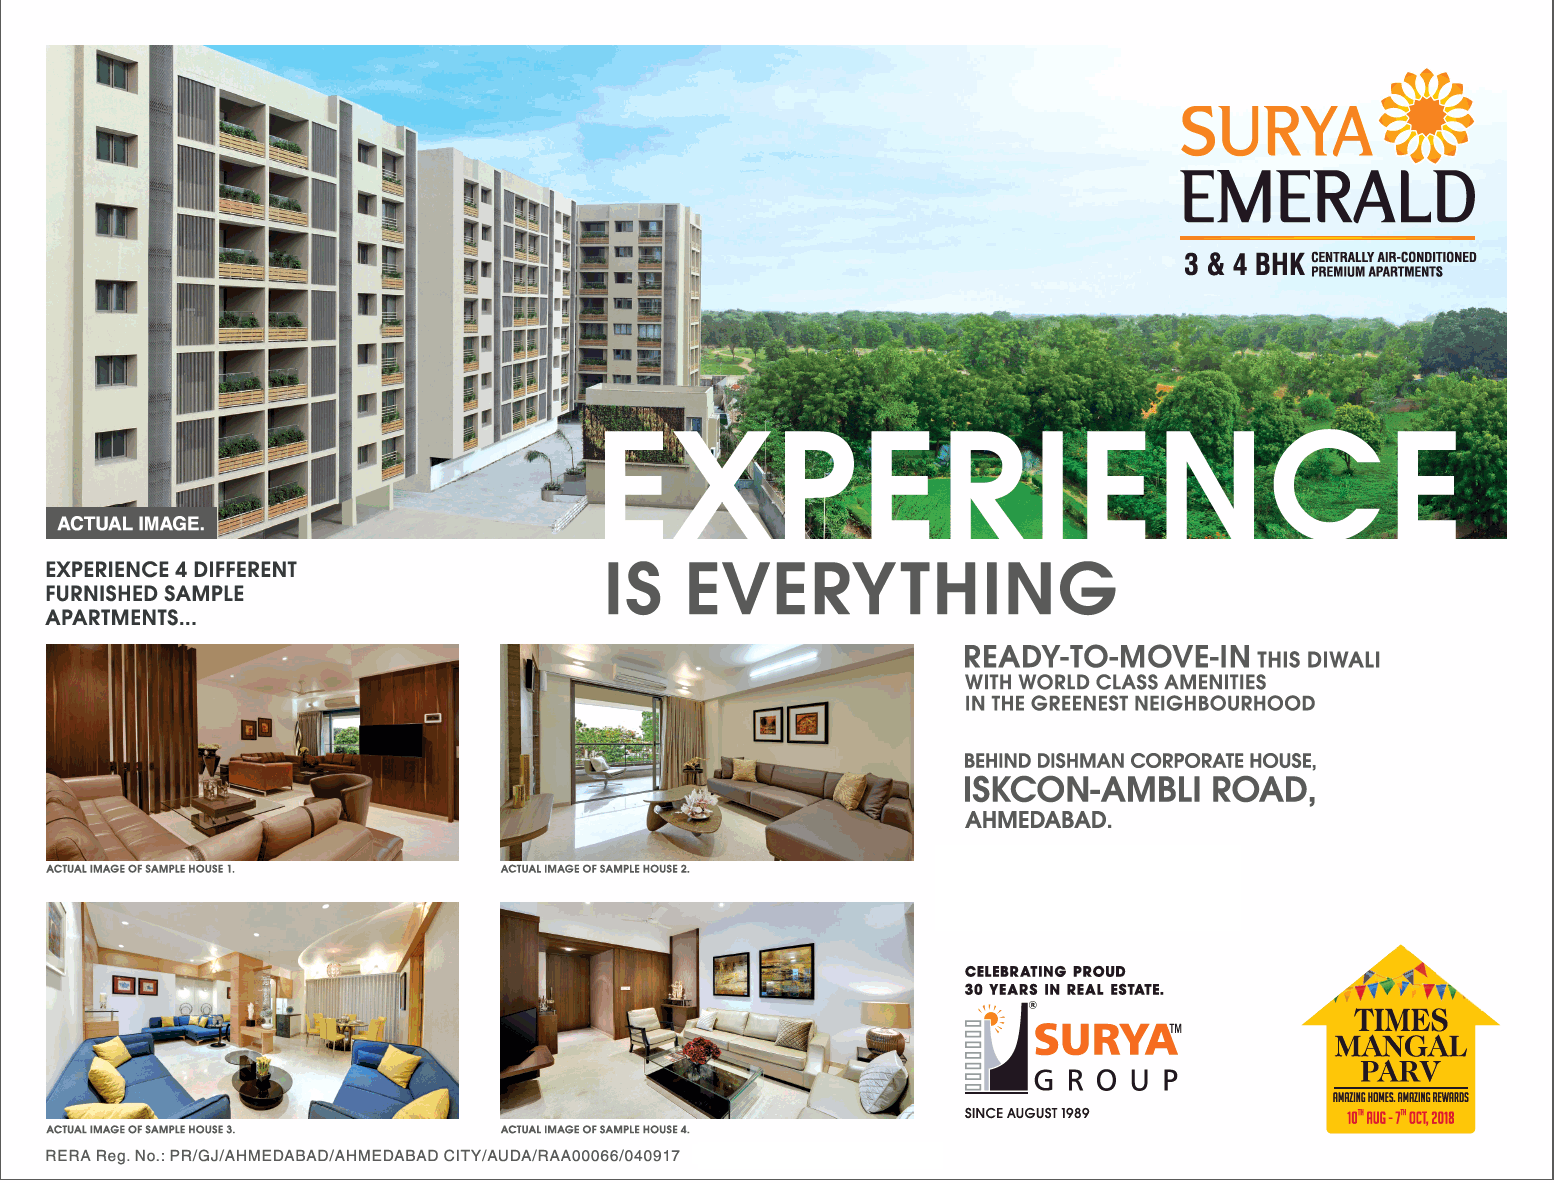 Book centrally air conditioned 3 & 4 bhk at Surya Emerald in Ahmedabad Update